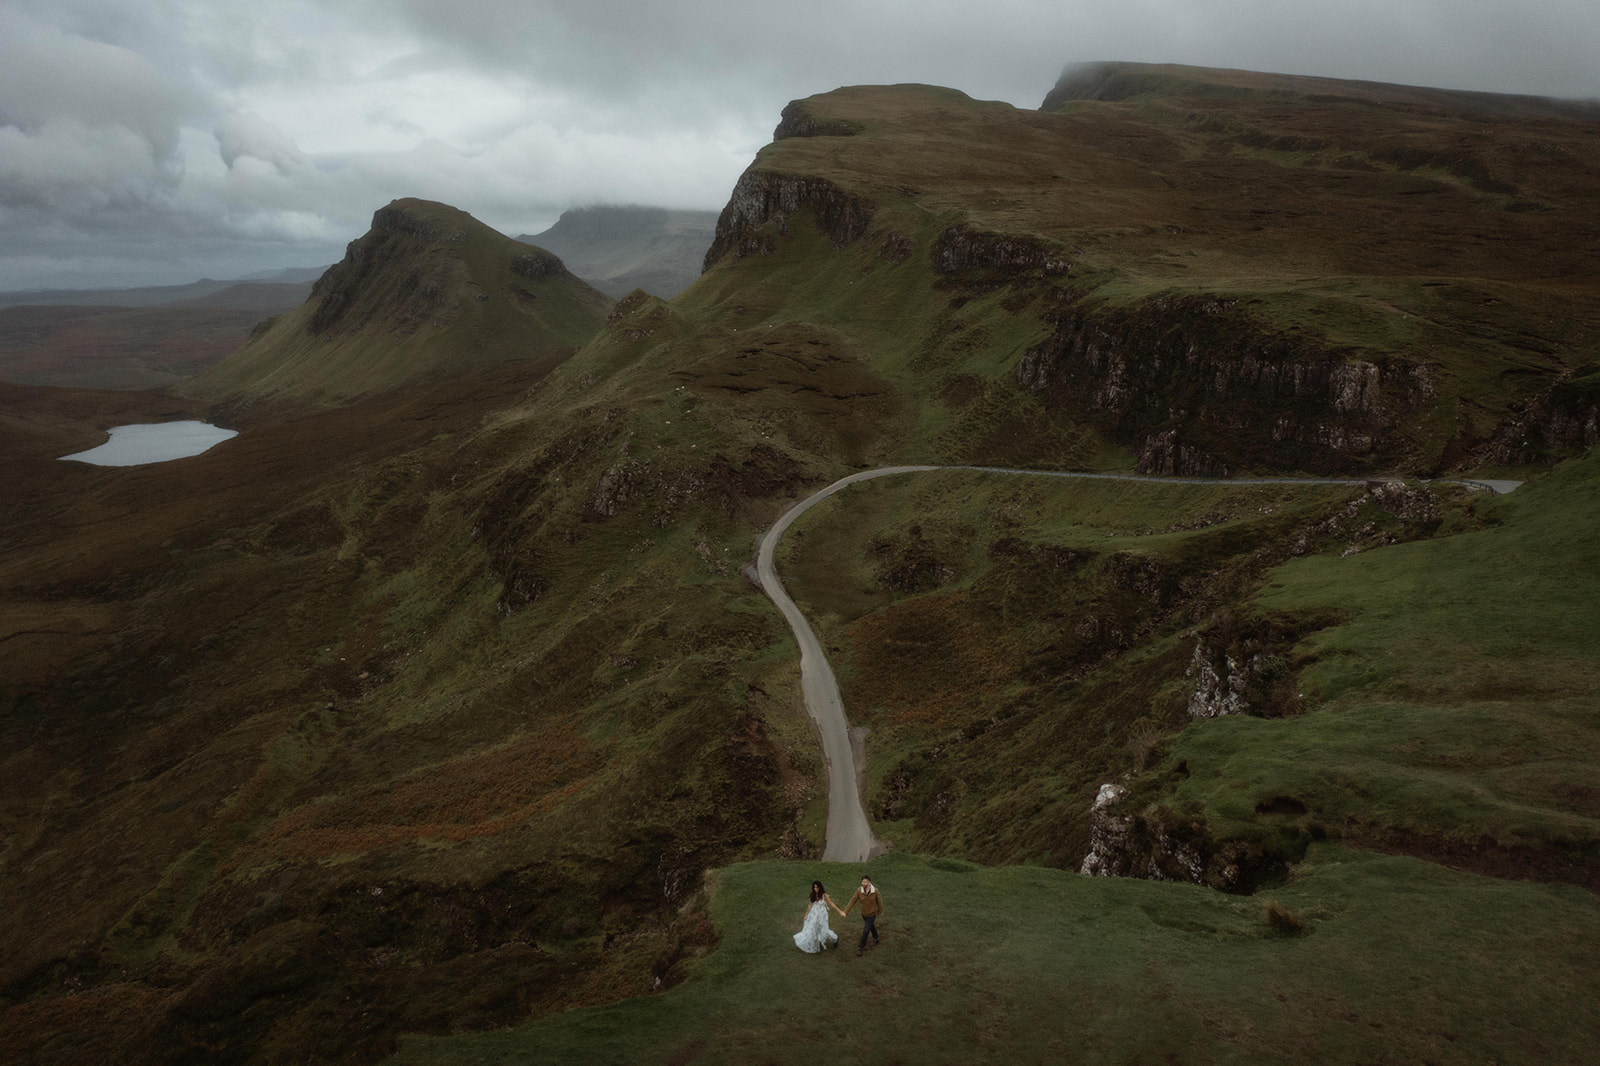 Alex and Elliot shared a romantic moment while having the beautiful Quiraing, Isle of Skye, Scotland as their backdrop